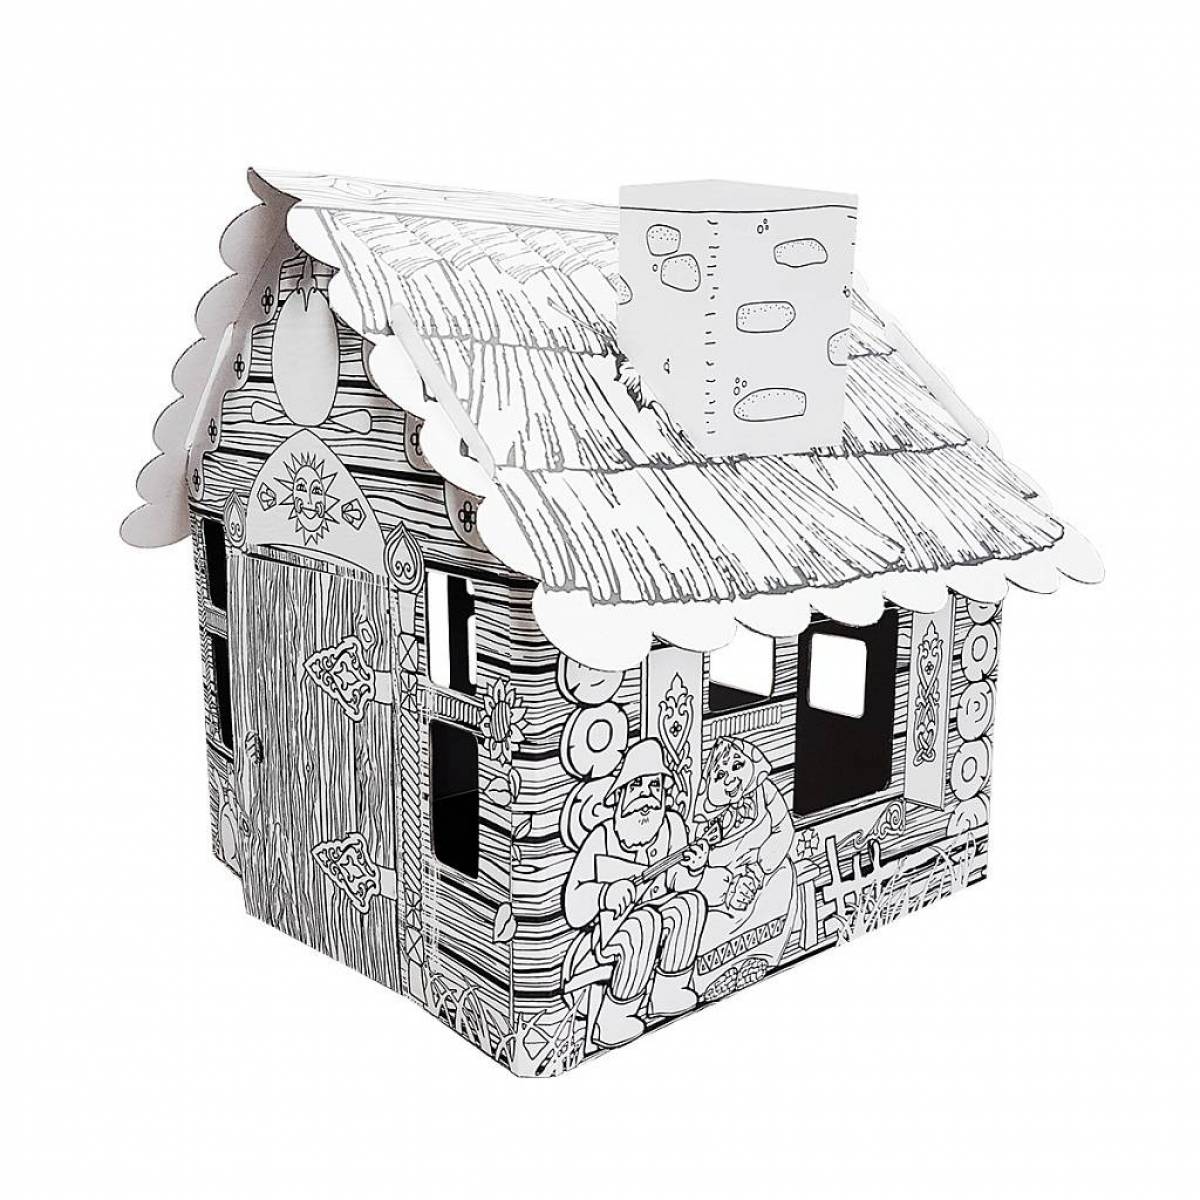 Coloring book playful cardboard house